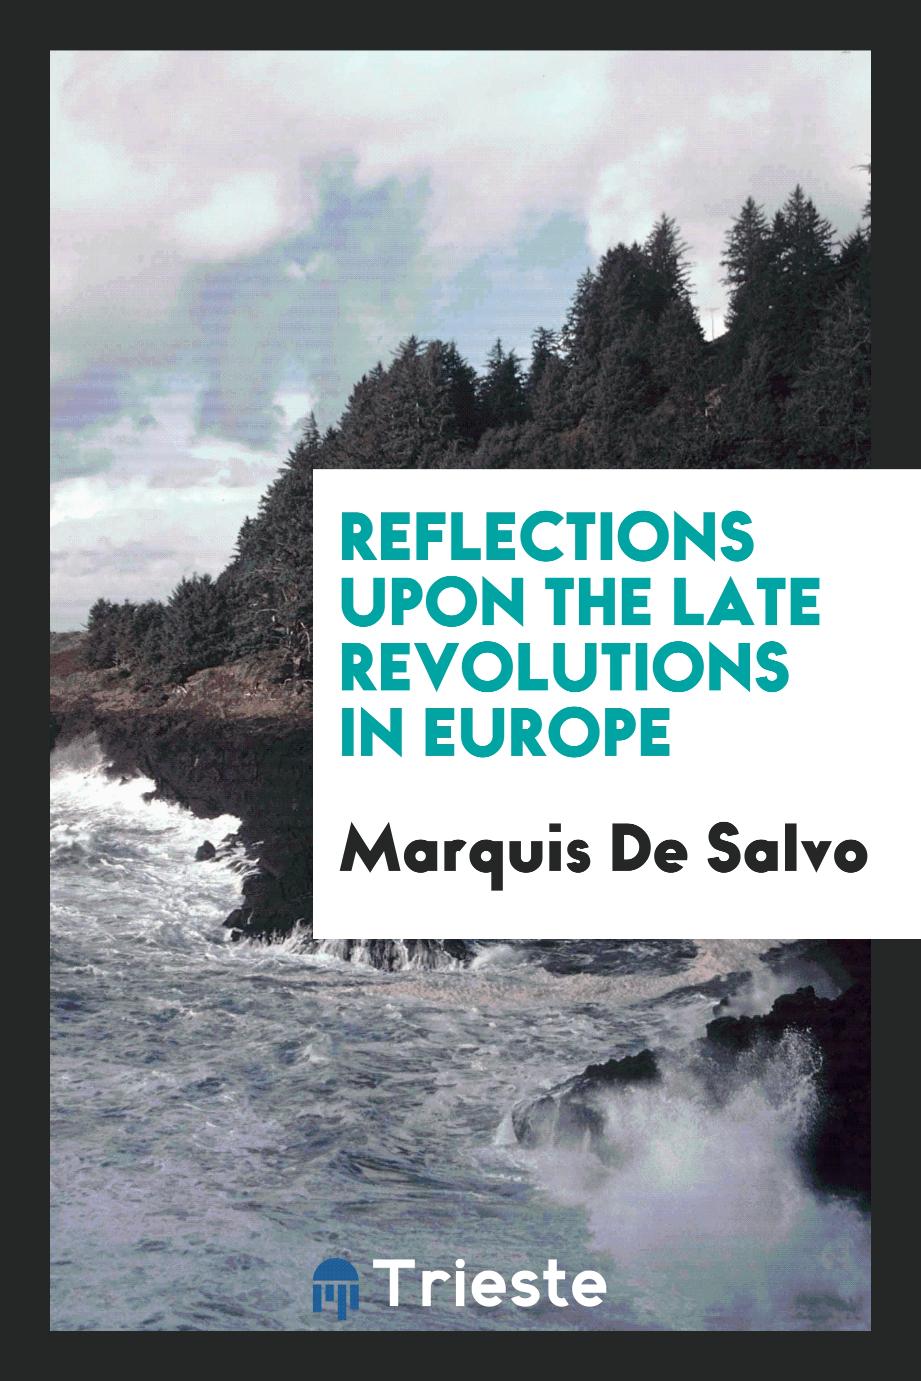 Reflections upon the Late Revolutions in Europe